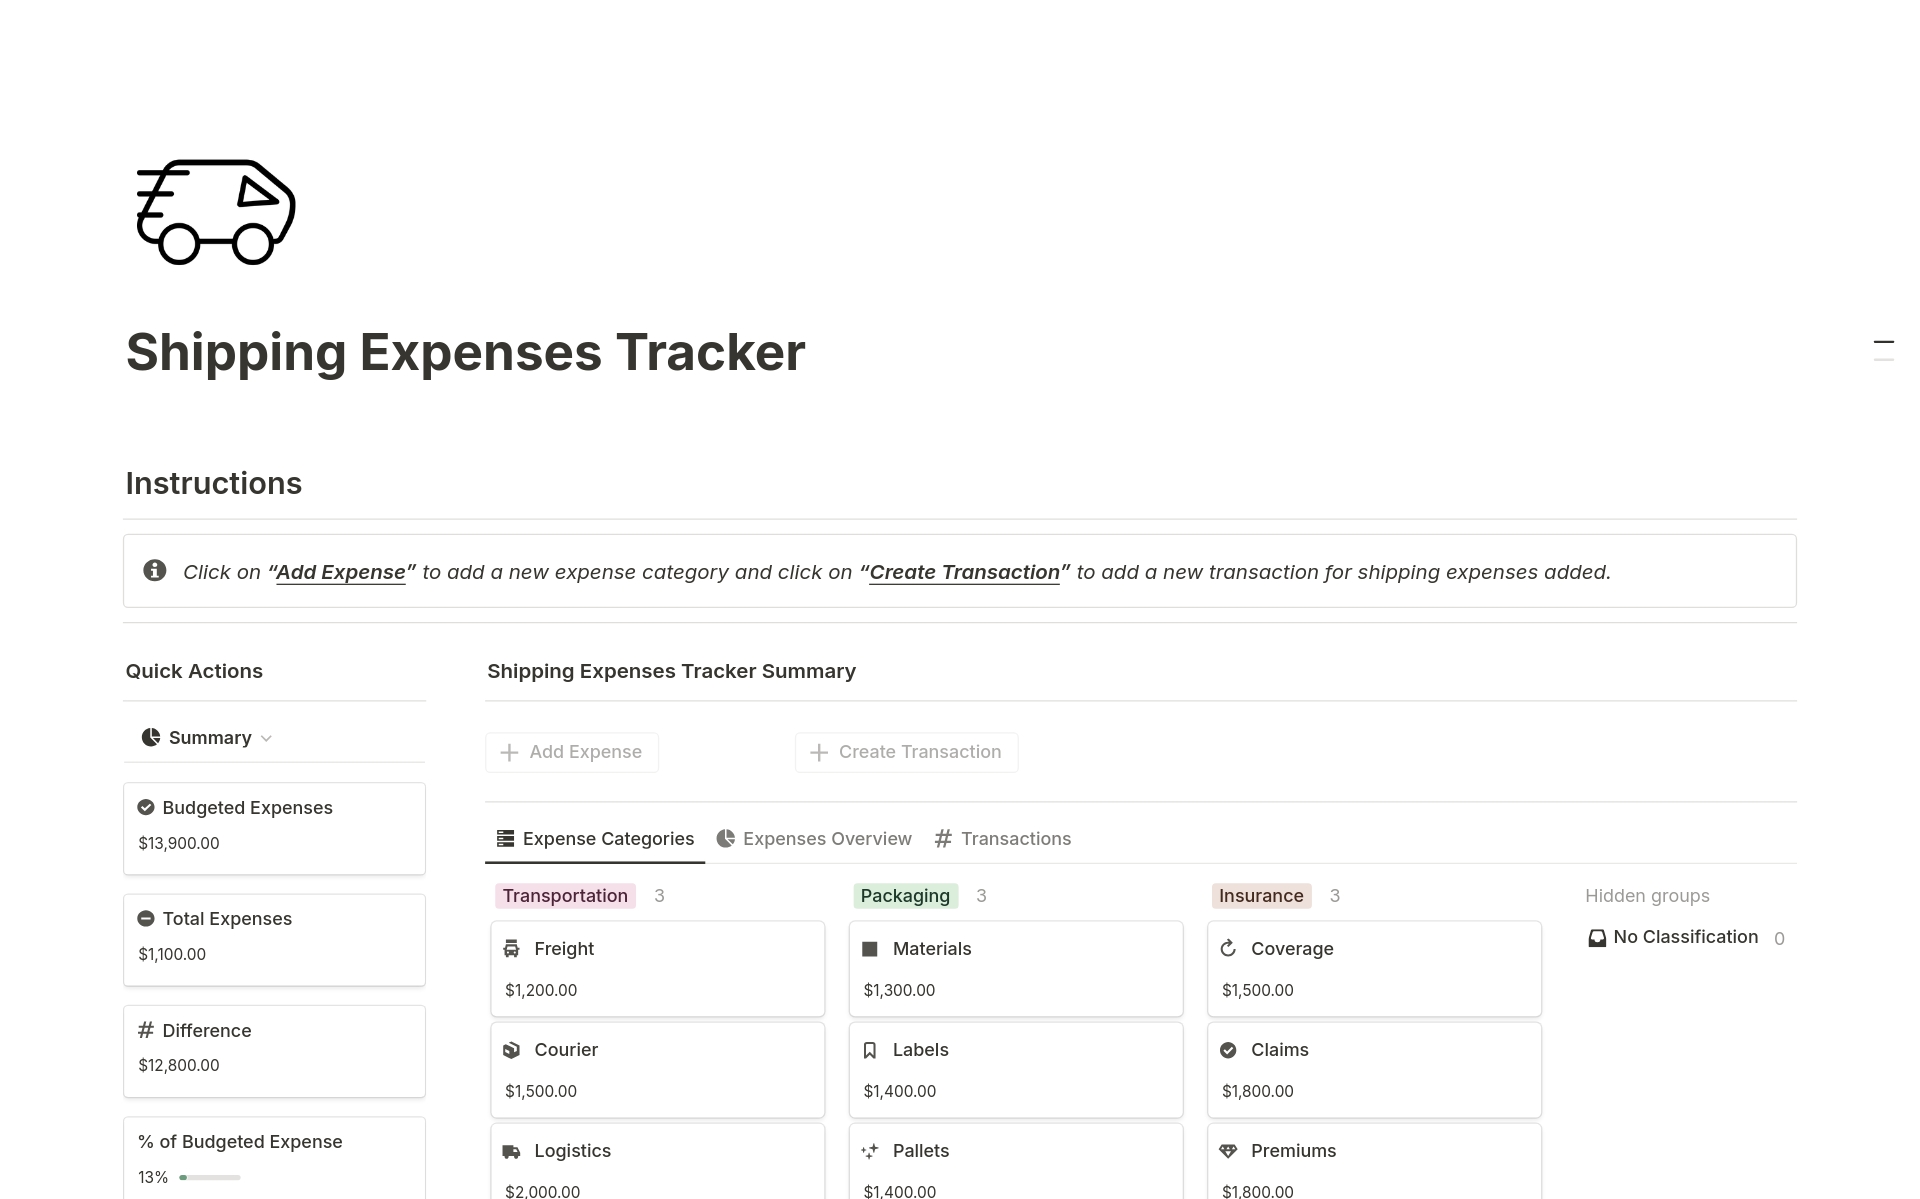 Ideal for those who are looking to manage the shipping expenses of their business, this tracker helps you keep track of legal expenses such as transportation, packaging, insurance expenses and much more.